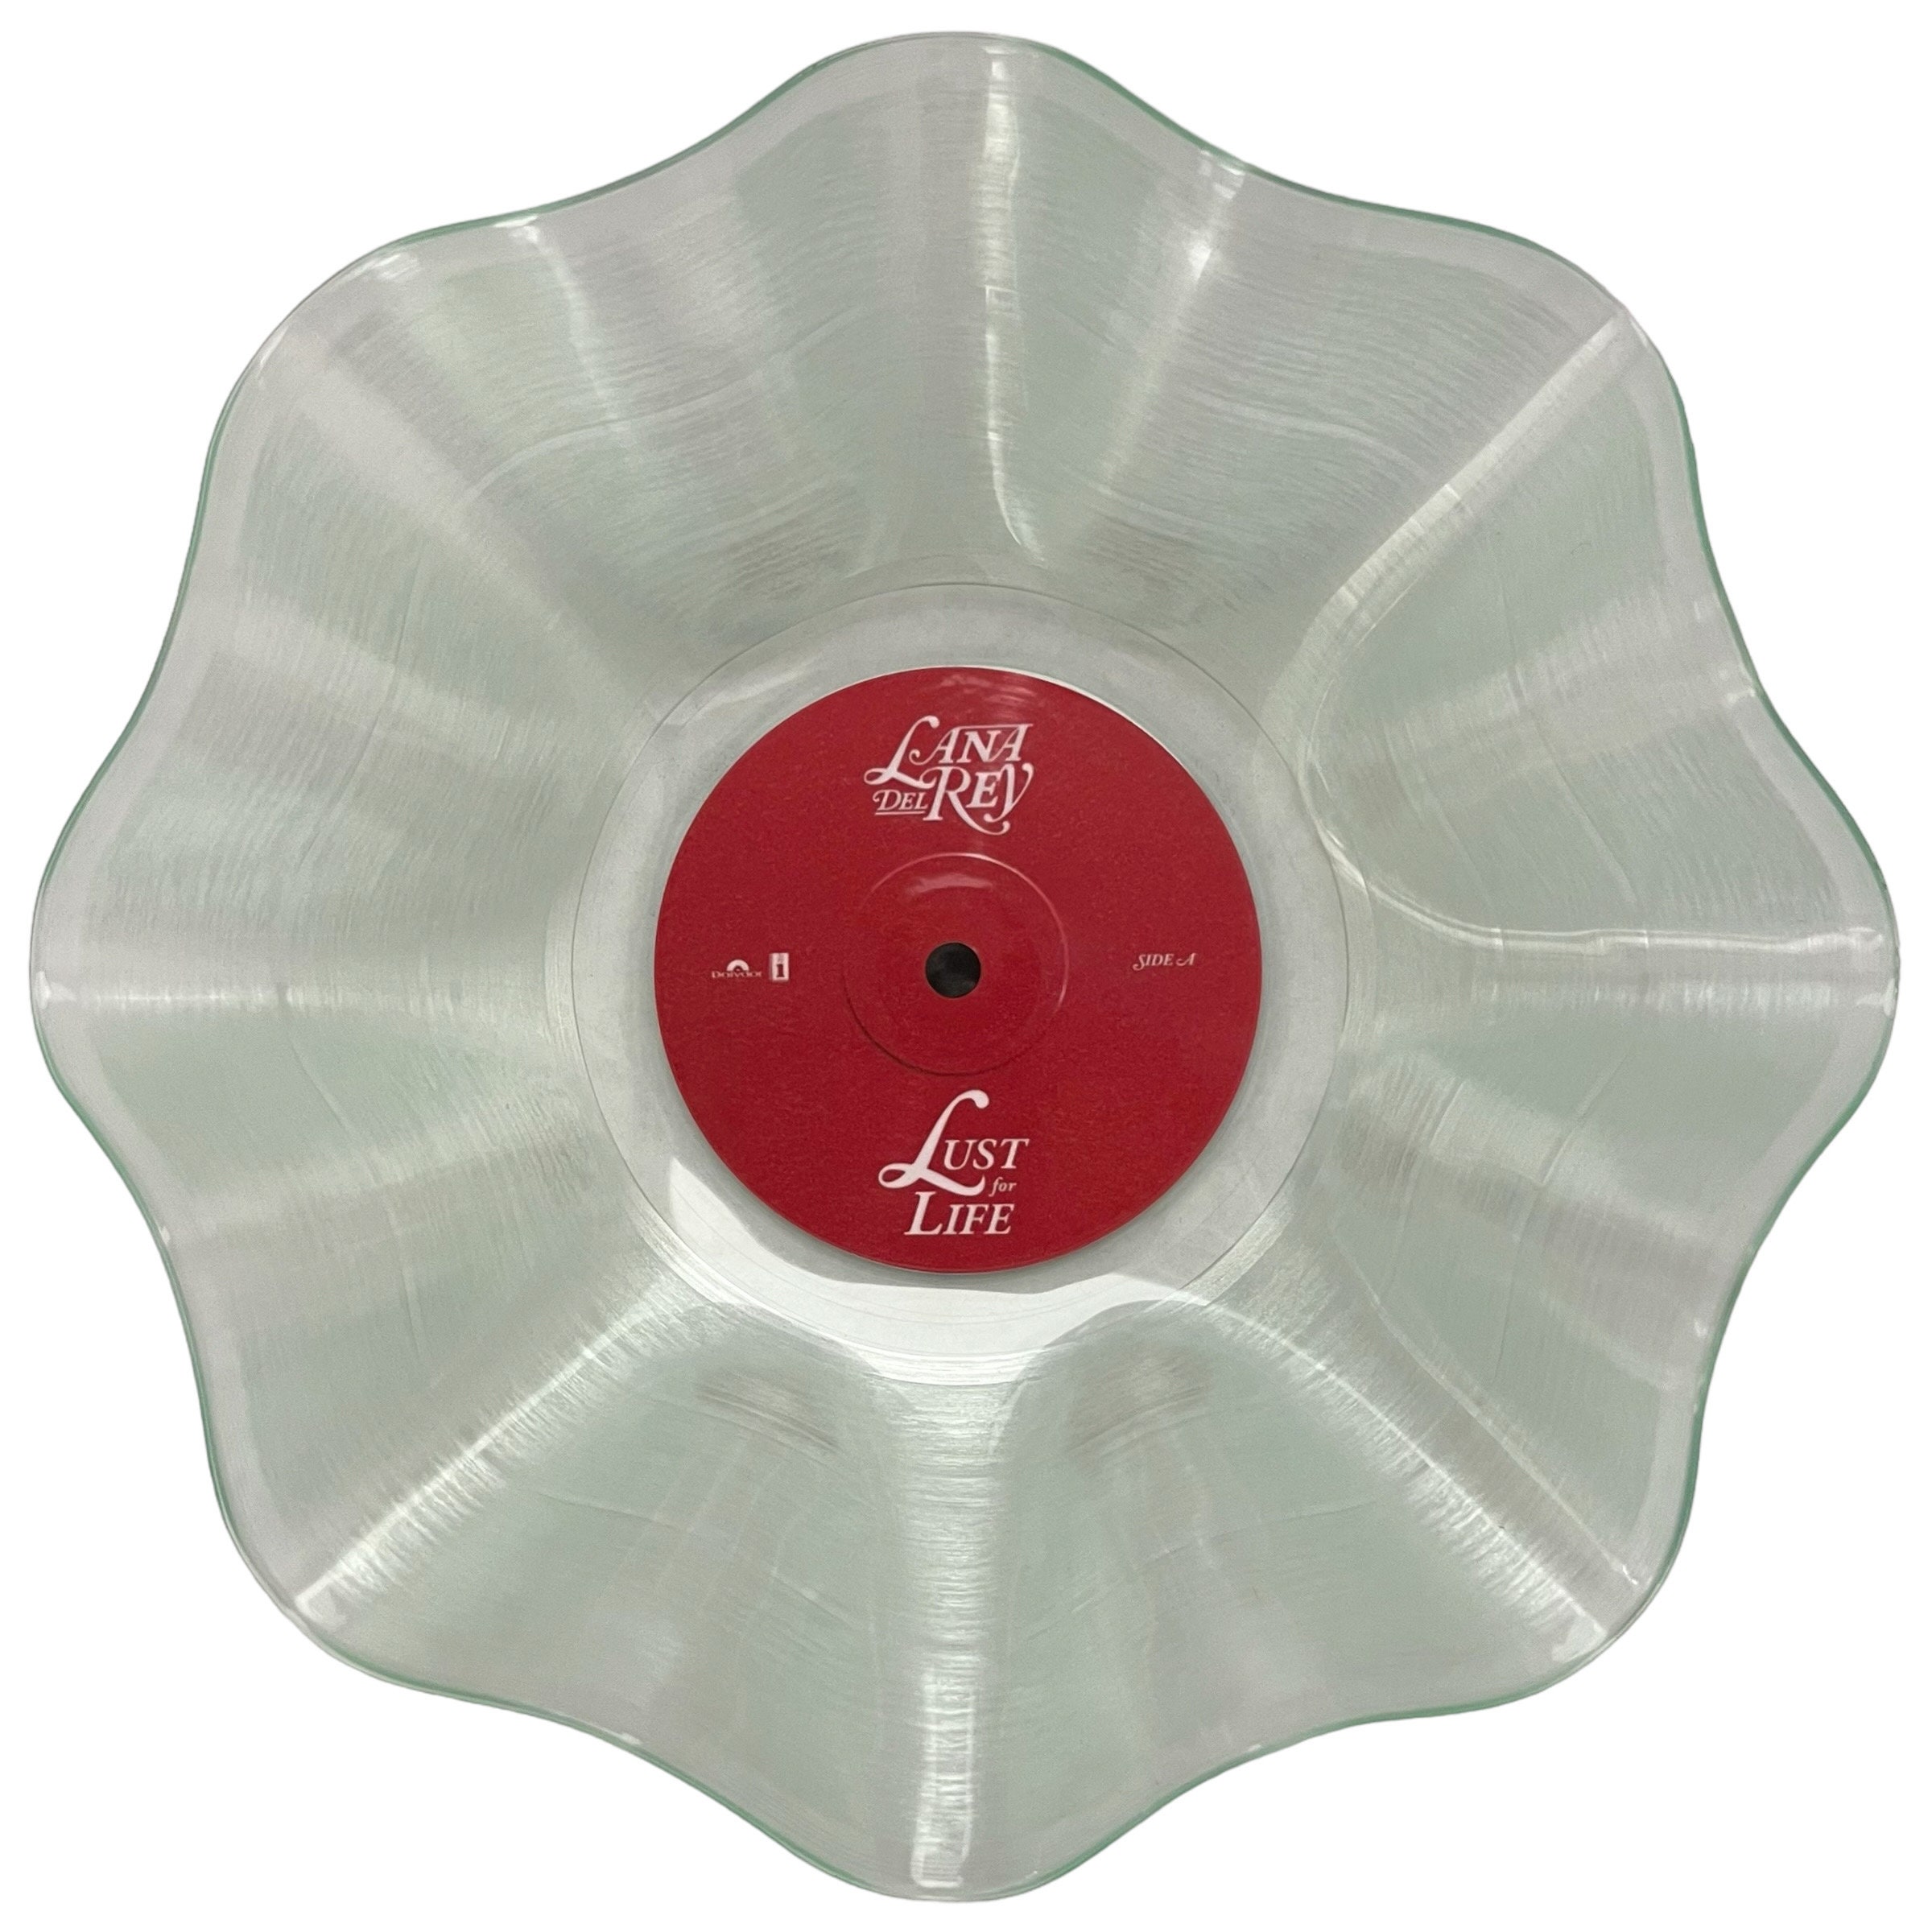 Lana Del Rey - Born To Die Record Bowl [TRANSLUCENT RED SPLATTERED Vinyl]  Classic Rock / Synth-Pop 12 Vinyl Collectible / Wall Decor